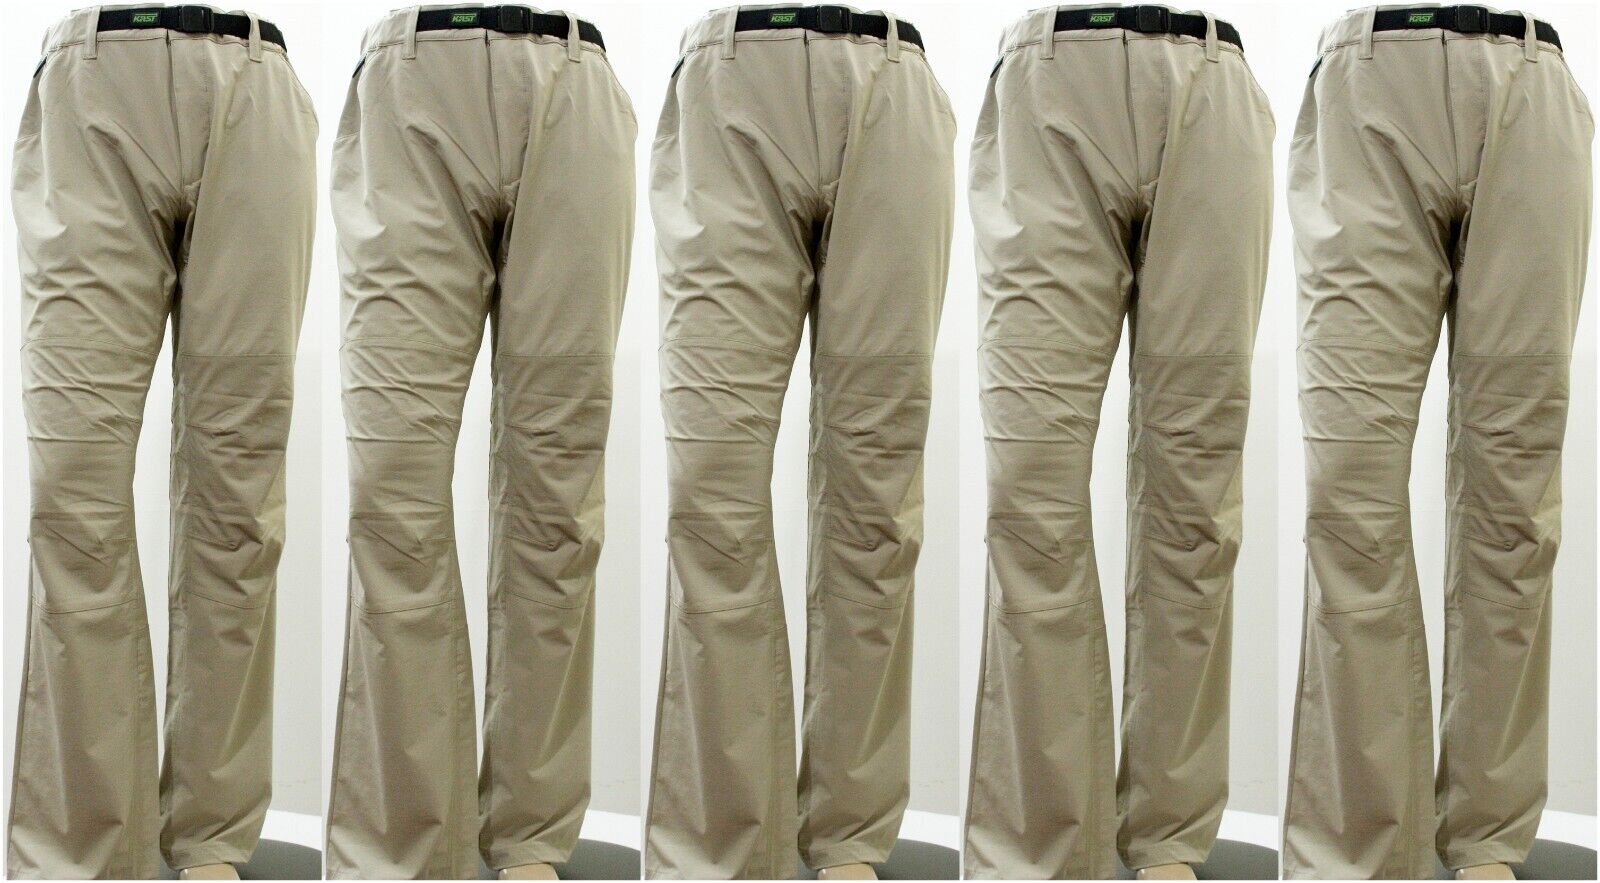 Lot Of 5 Kast Extreme Fishing Gear Revolver Guide Pants Khaki Size Large Nwt Op